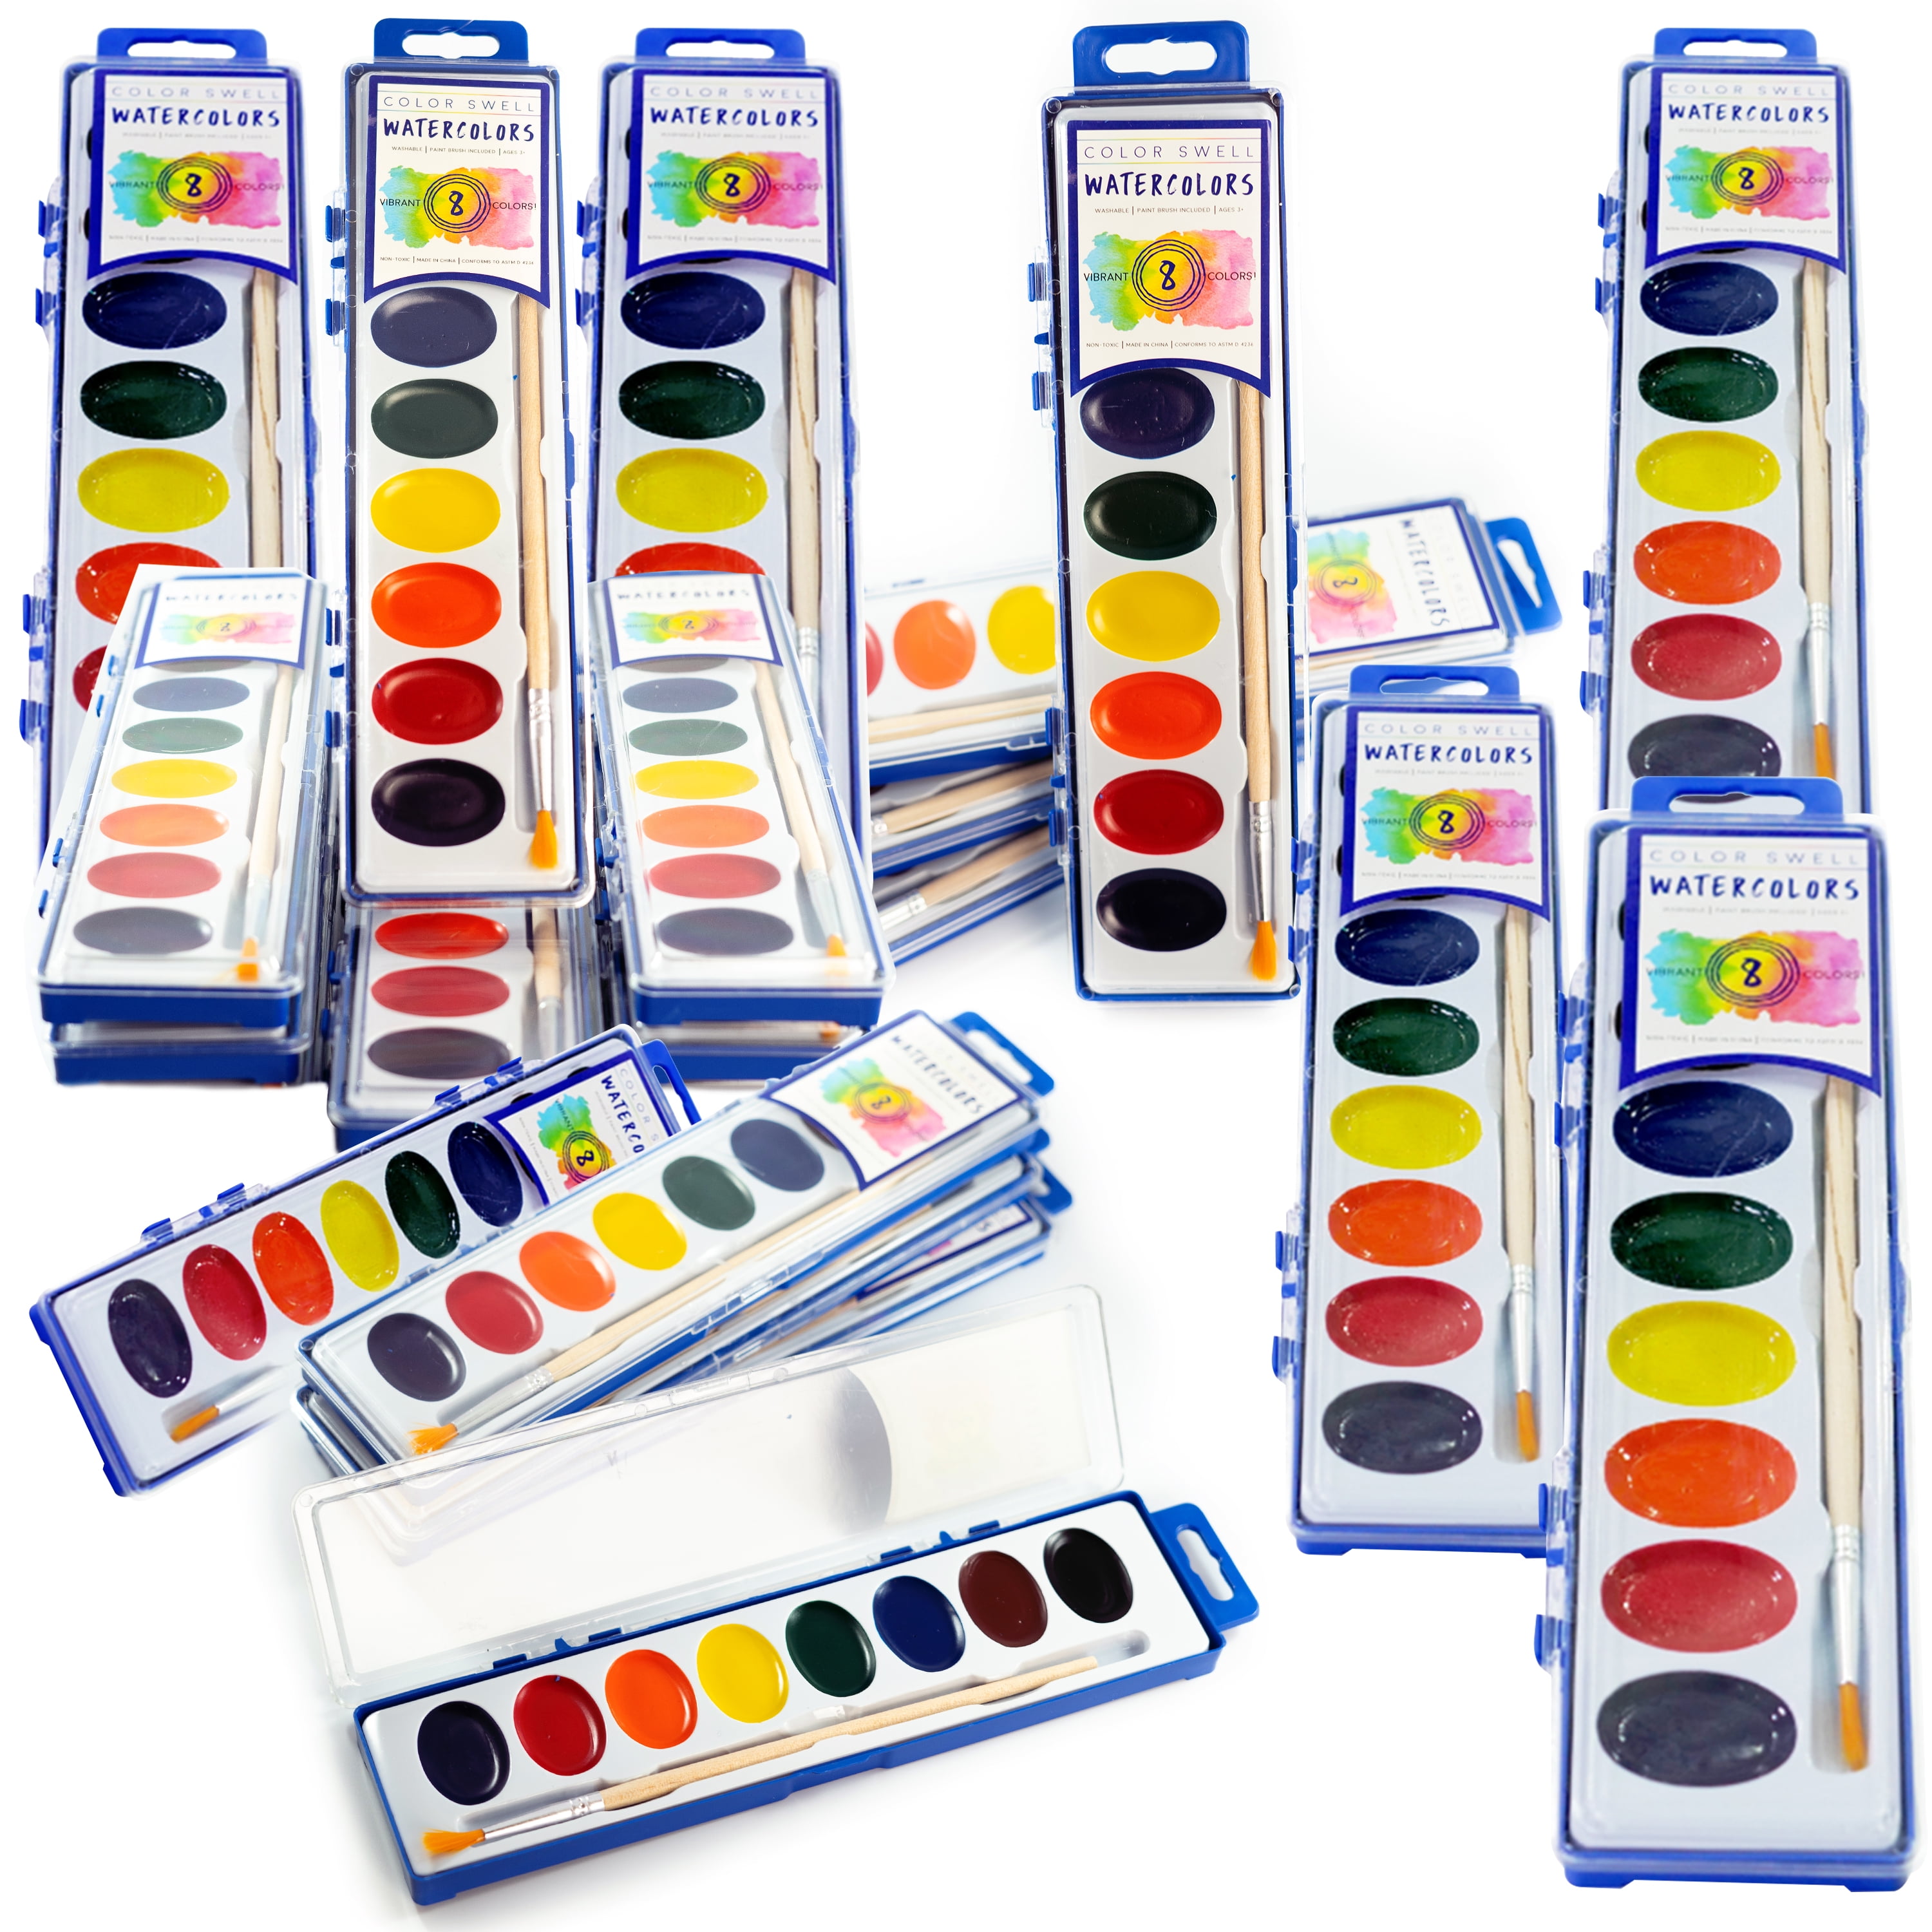 10pk Paint Tray Palettes DIY Craft Art Party Favors Watercolor Painting